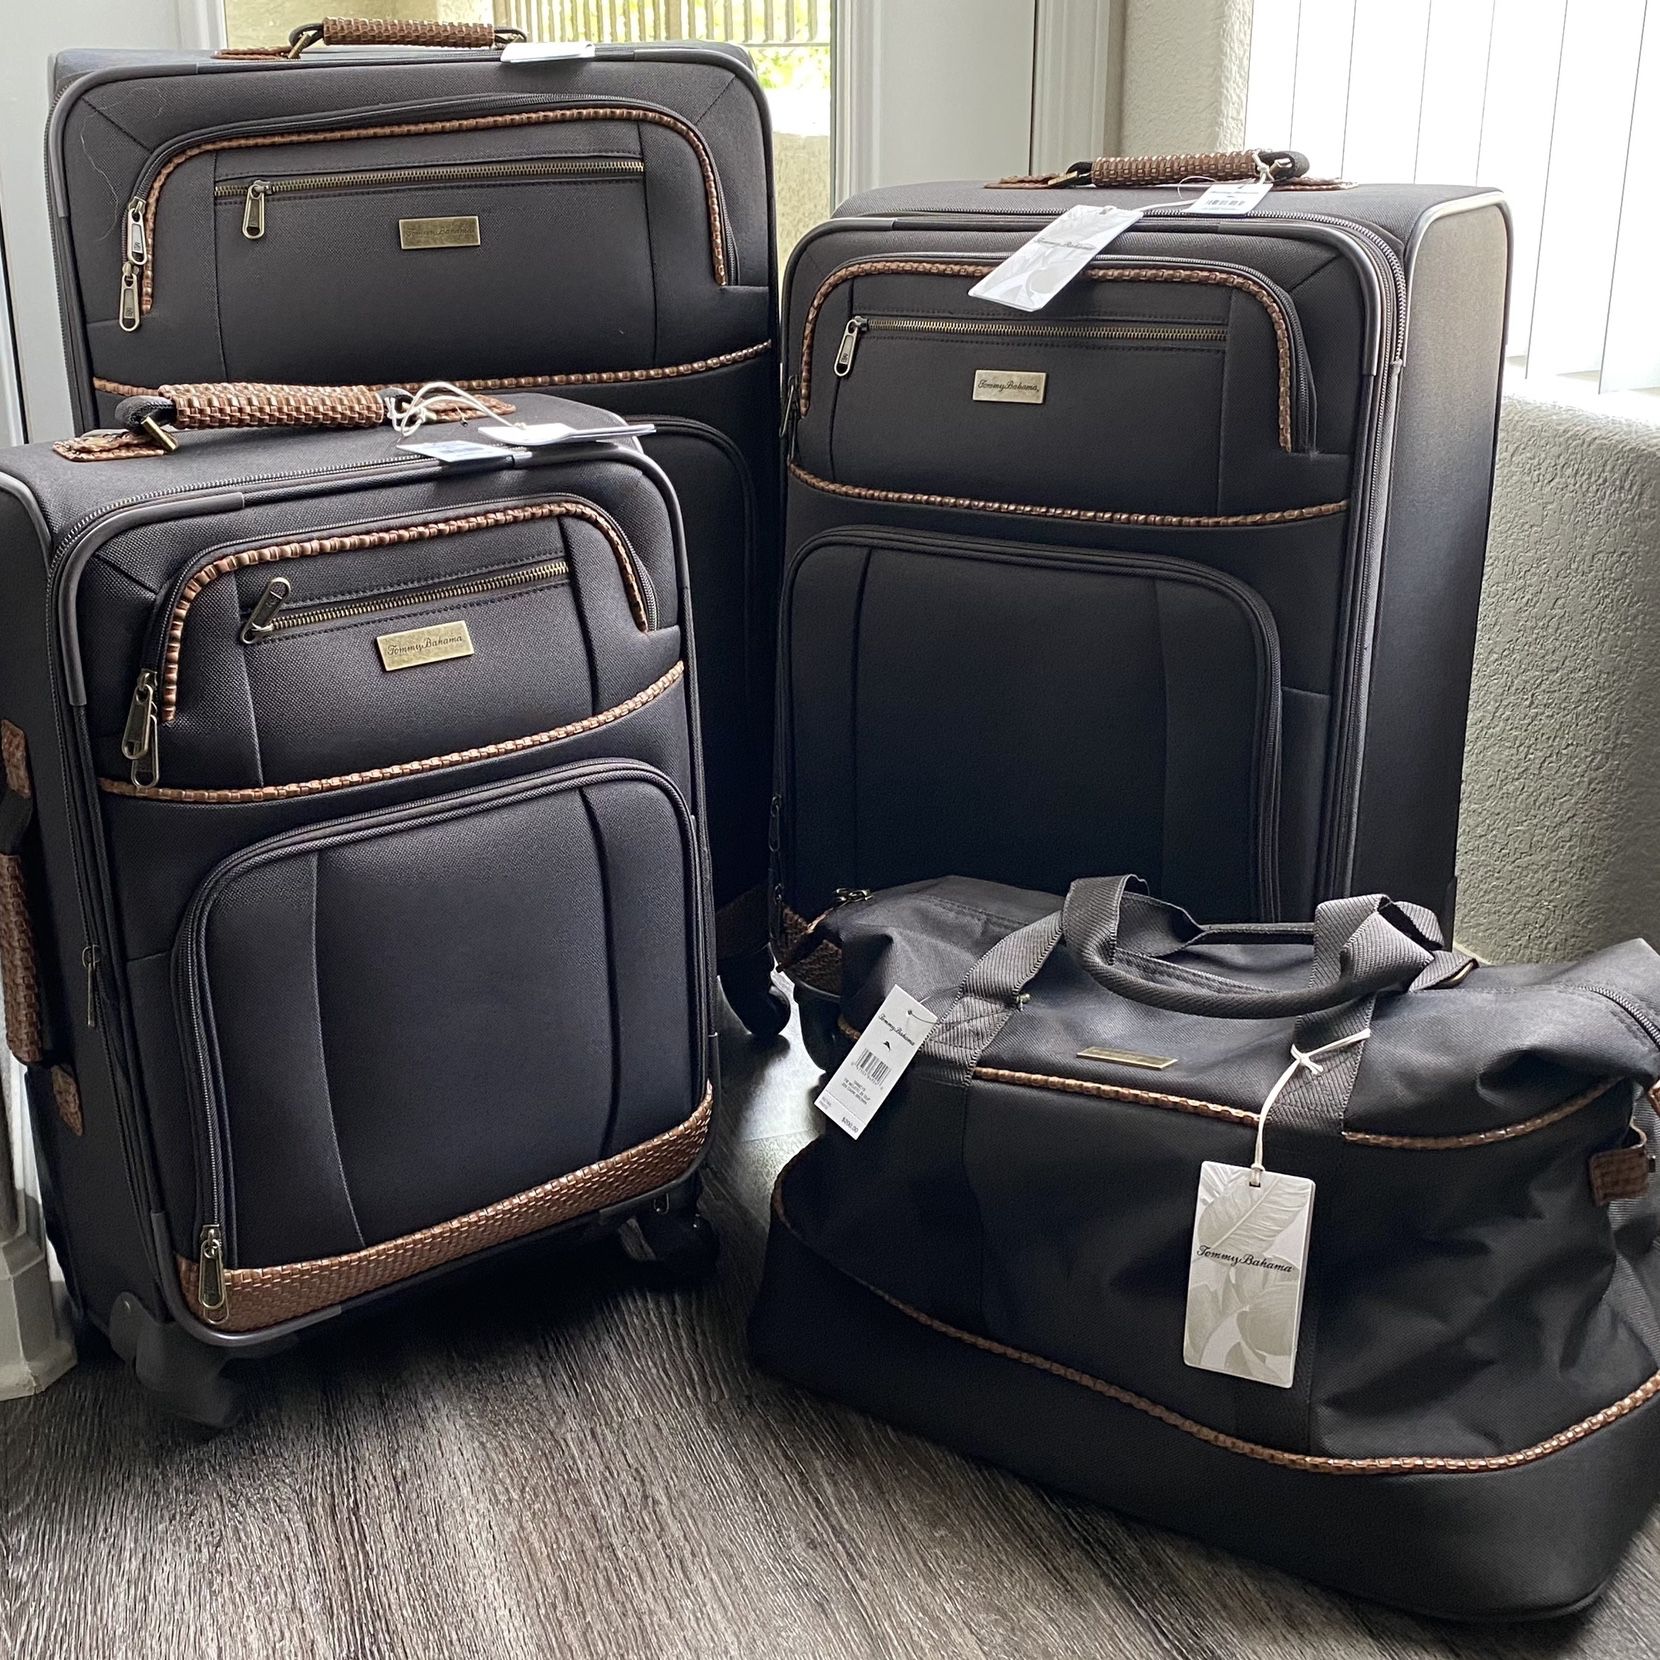 TUMI T-TECH Network 3-Piece Luggage Set for Sale in Hayward, CA - OfferUp